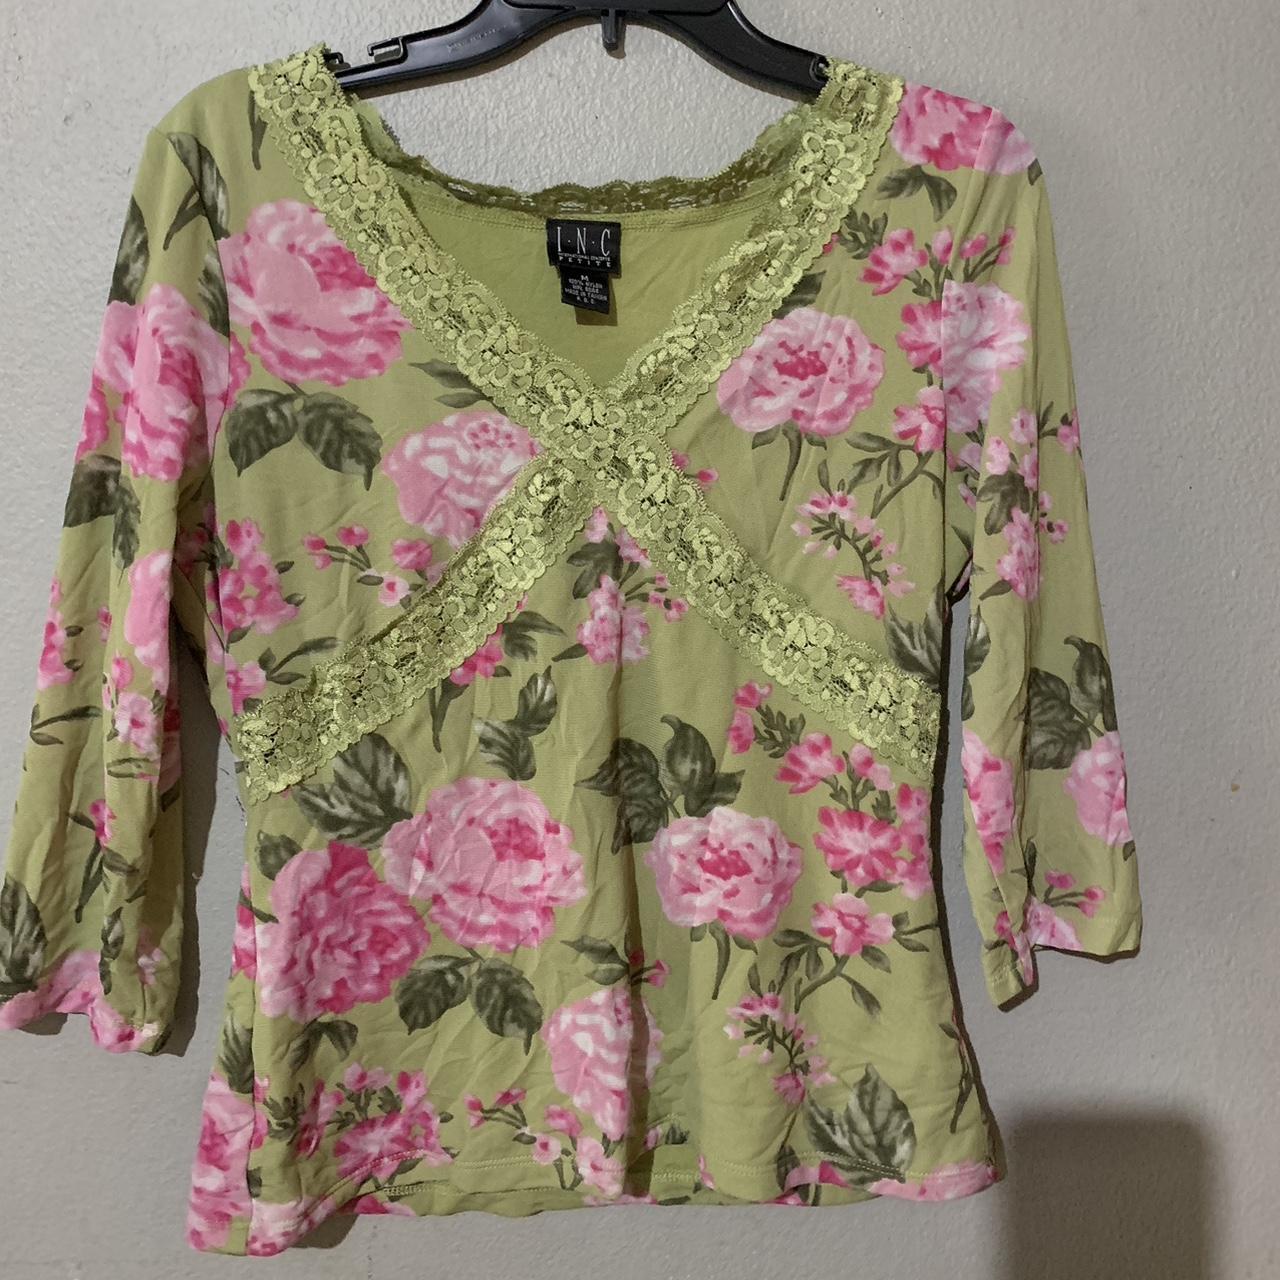 INC International Concepts Women's Green and Pink Blouse